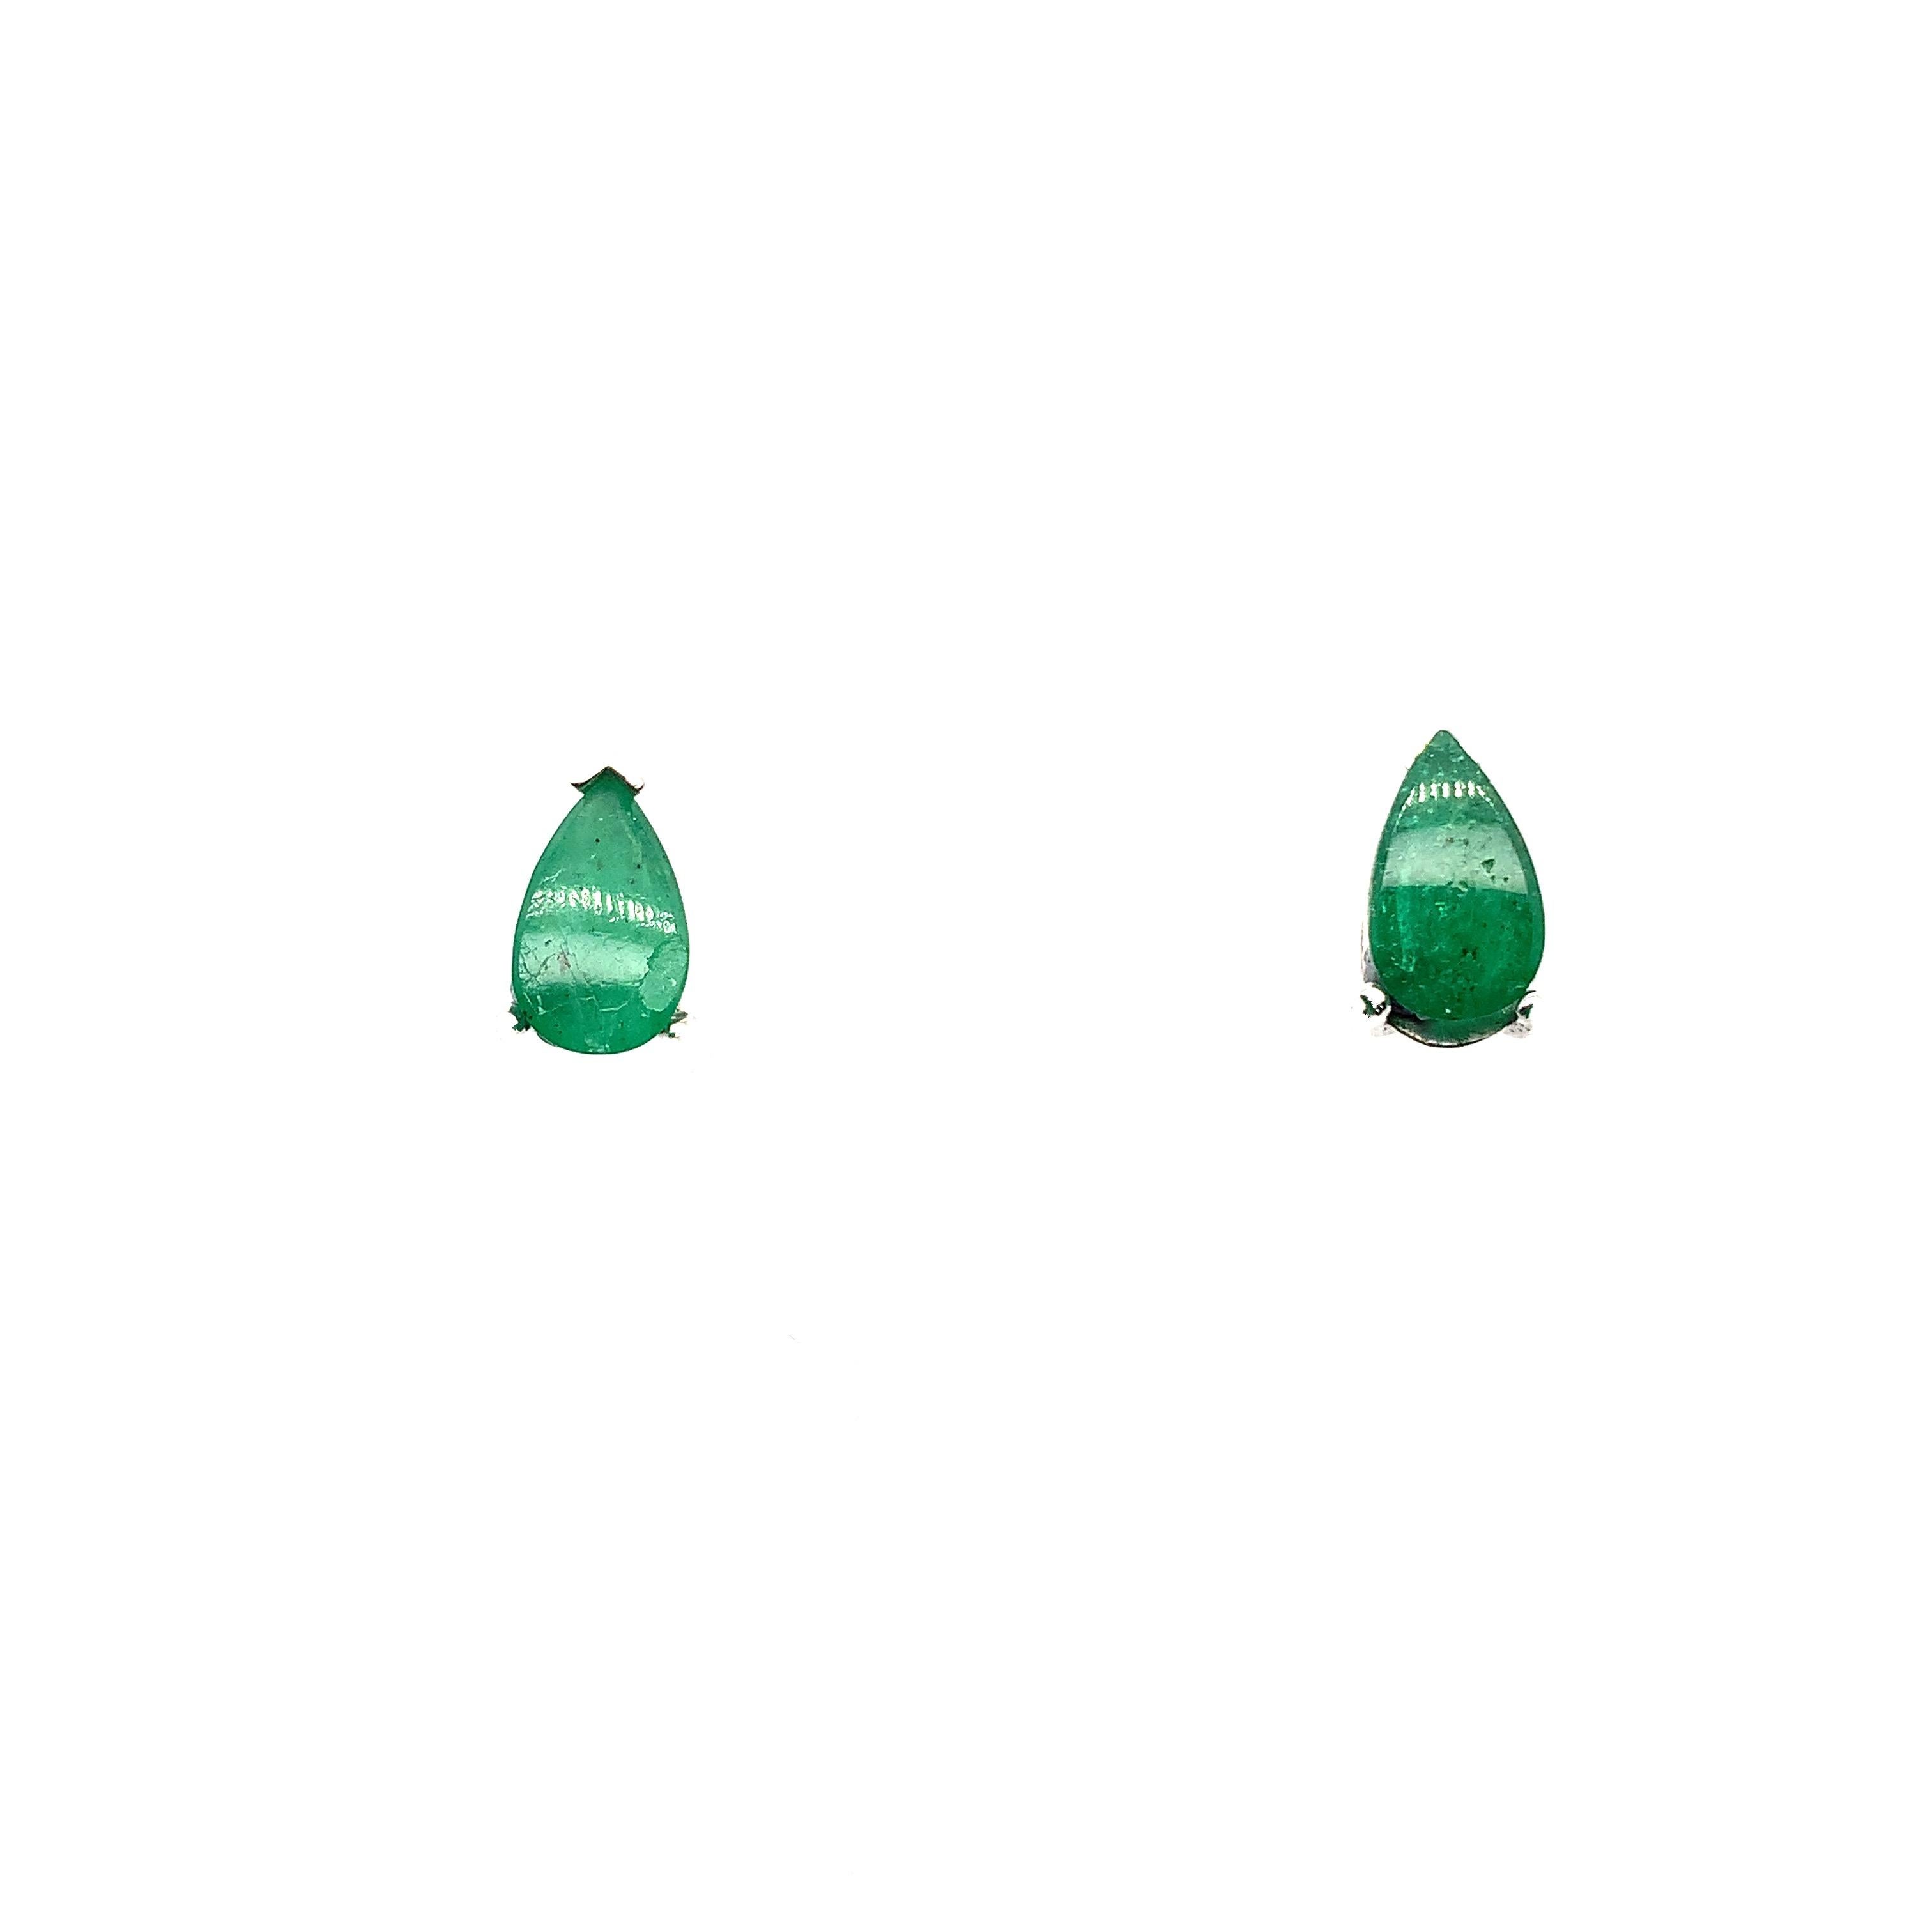 Green emerald art deco stud earrings 18k white gold
Green emerald pear shaped cabochon total weight 1.40ct
Solitaire style green emerald pear shaped cabochon stud earrings 18k white gold
Hallmarked
Measuring approximately 9x7mm
Natural untreated